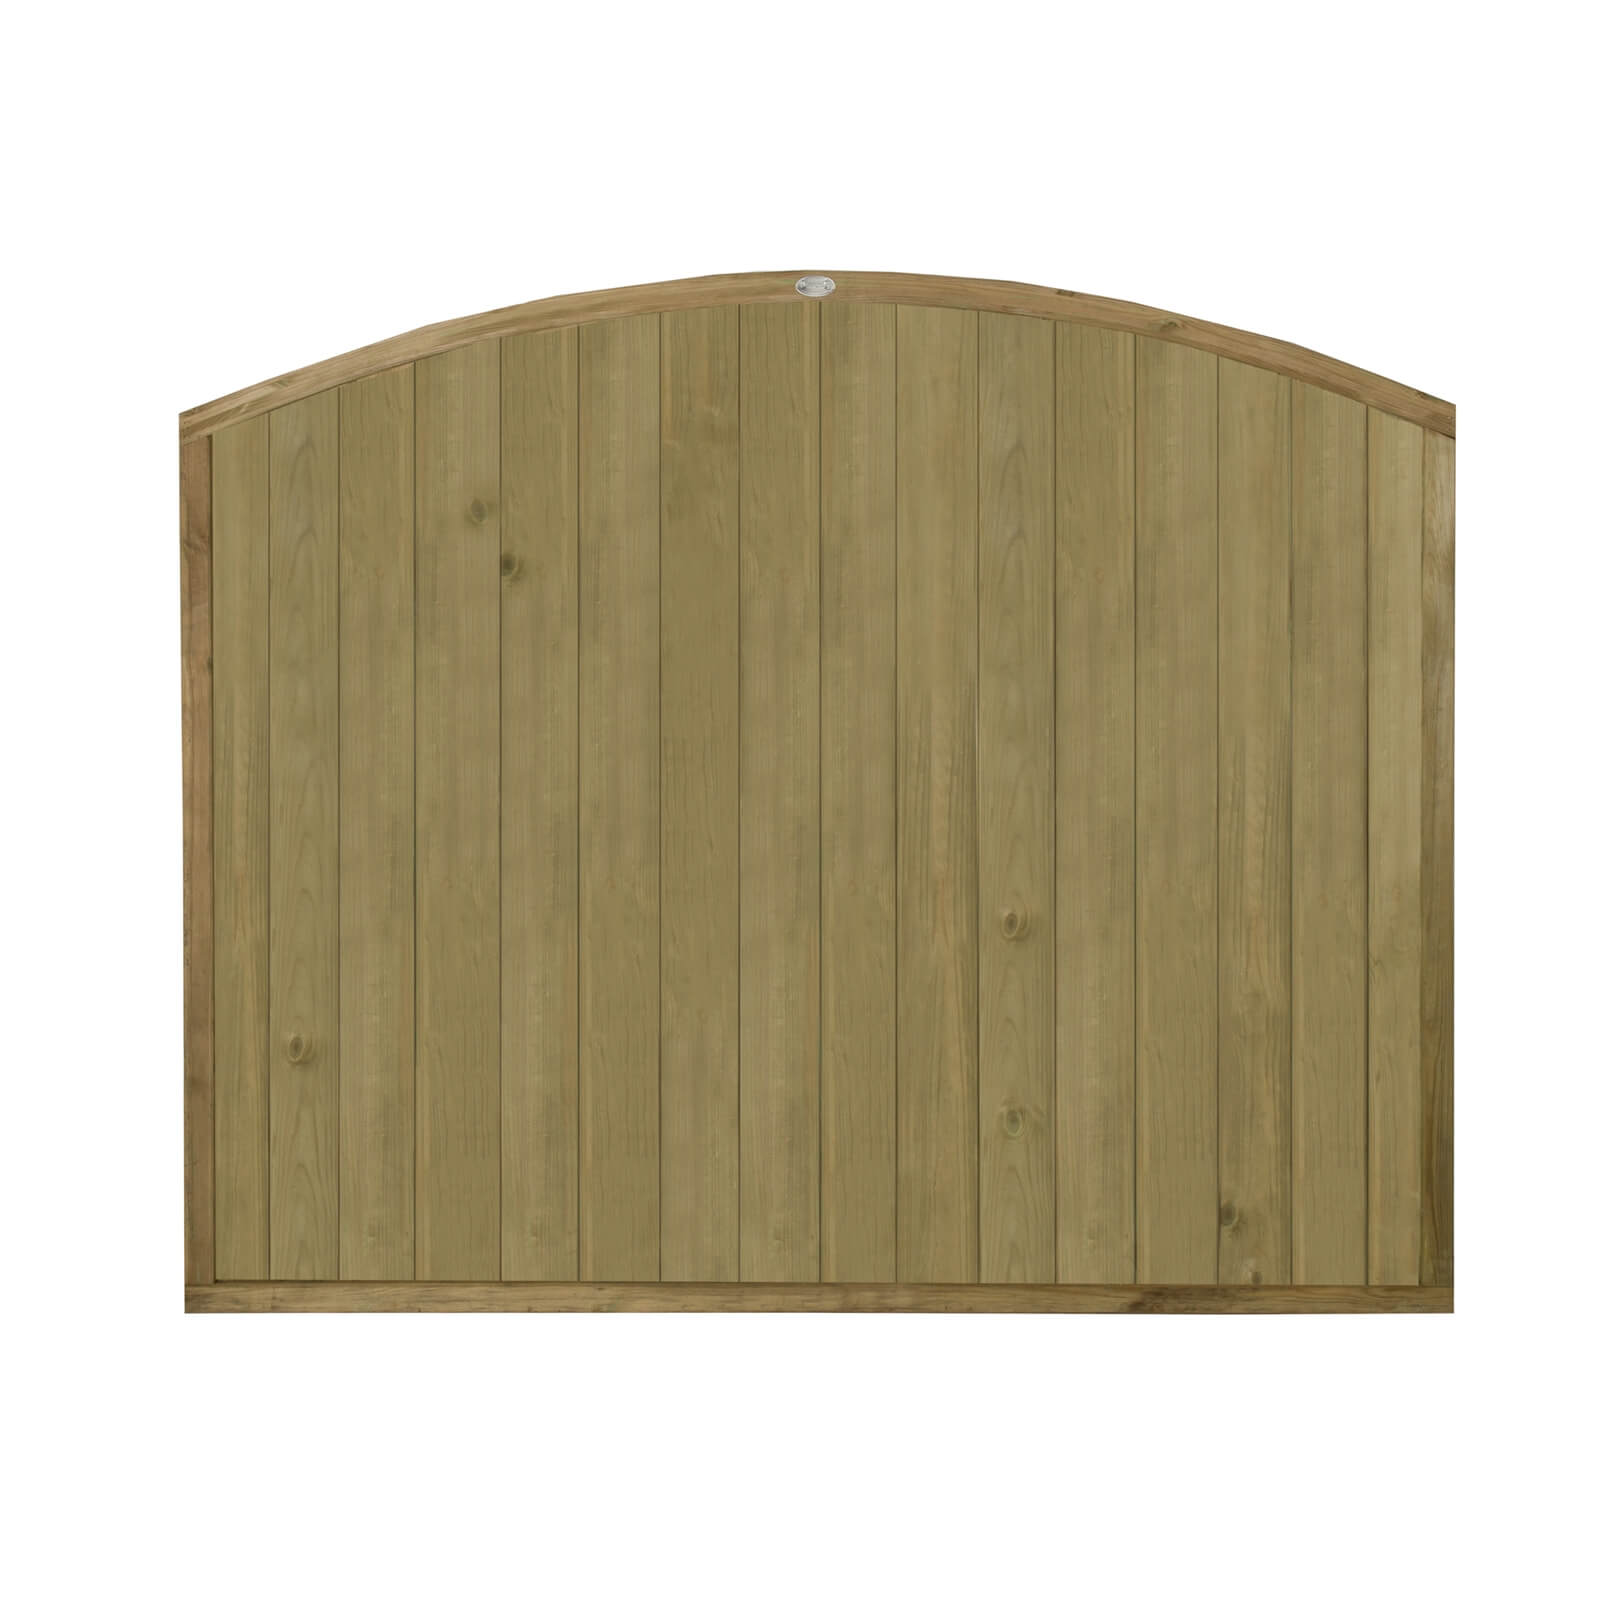 Forest Dome Tongue and Groove Panel - 5ft - Pack of 4